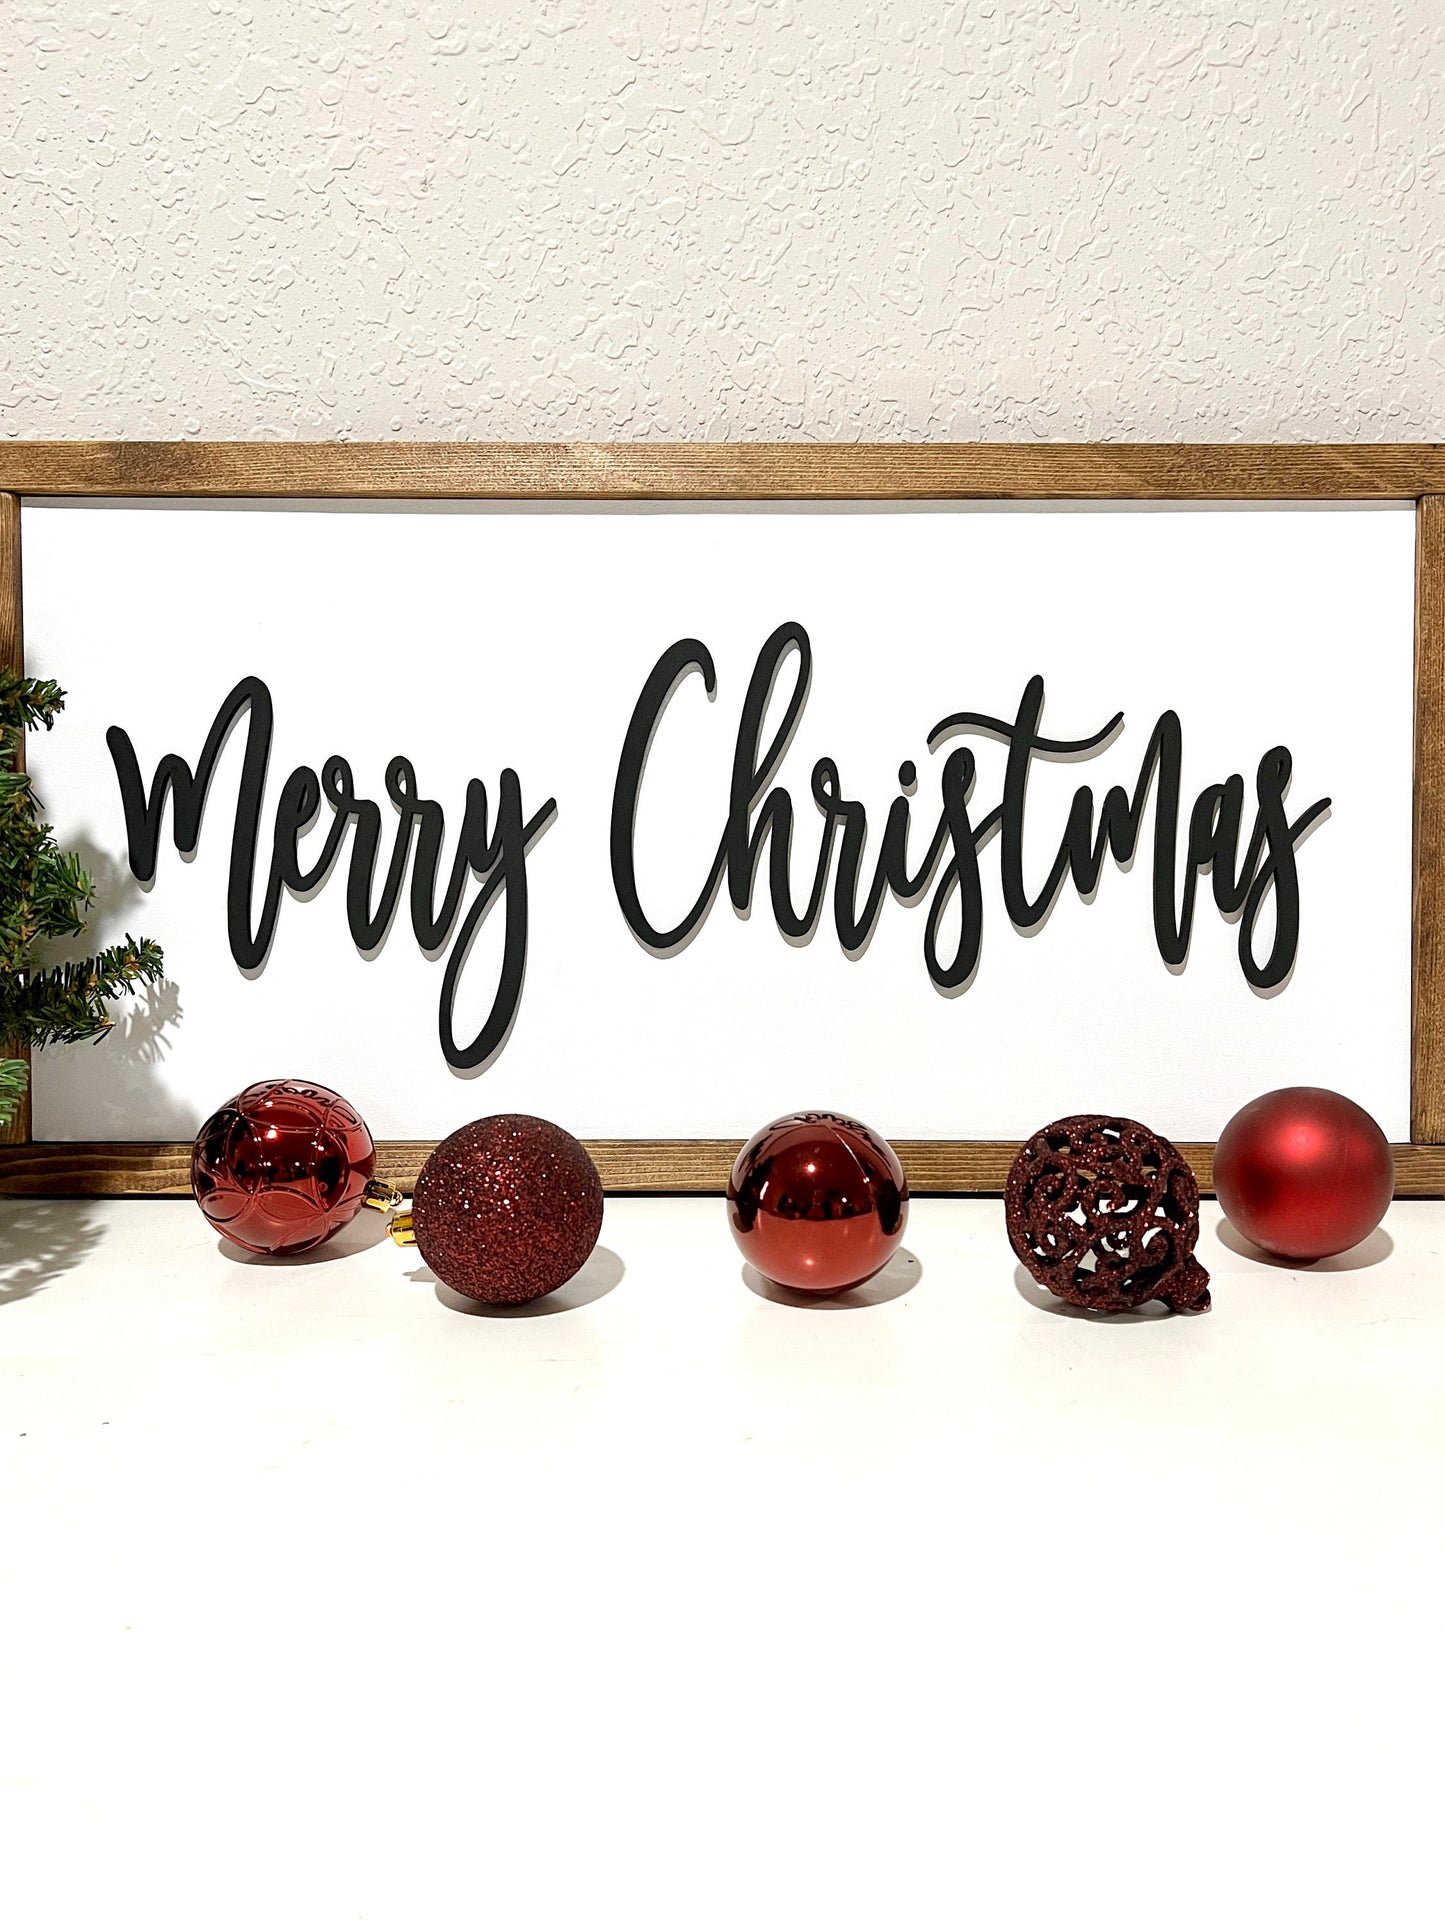 Merry Christmas sign, Christmas decorations, 3D holiday decor, framed wood signs, living room wooden sign wall hanging, hearth mantel decor